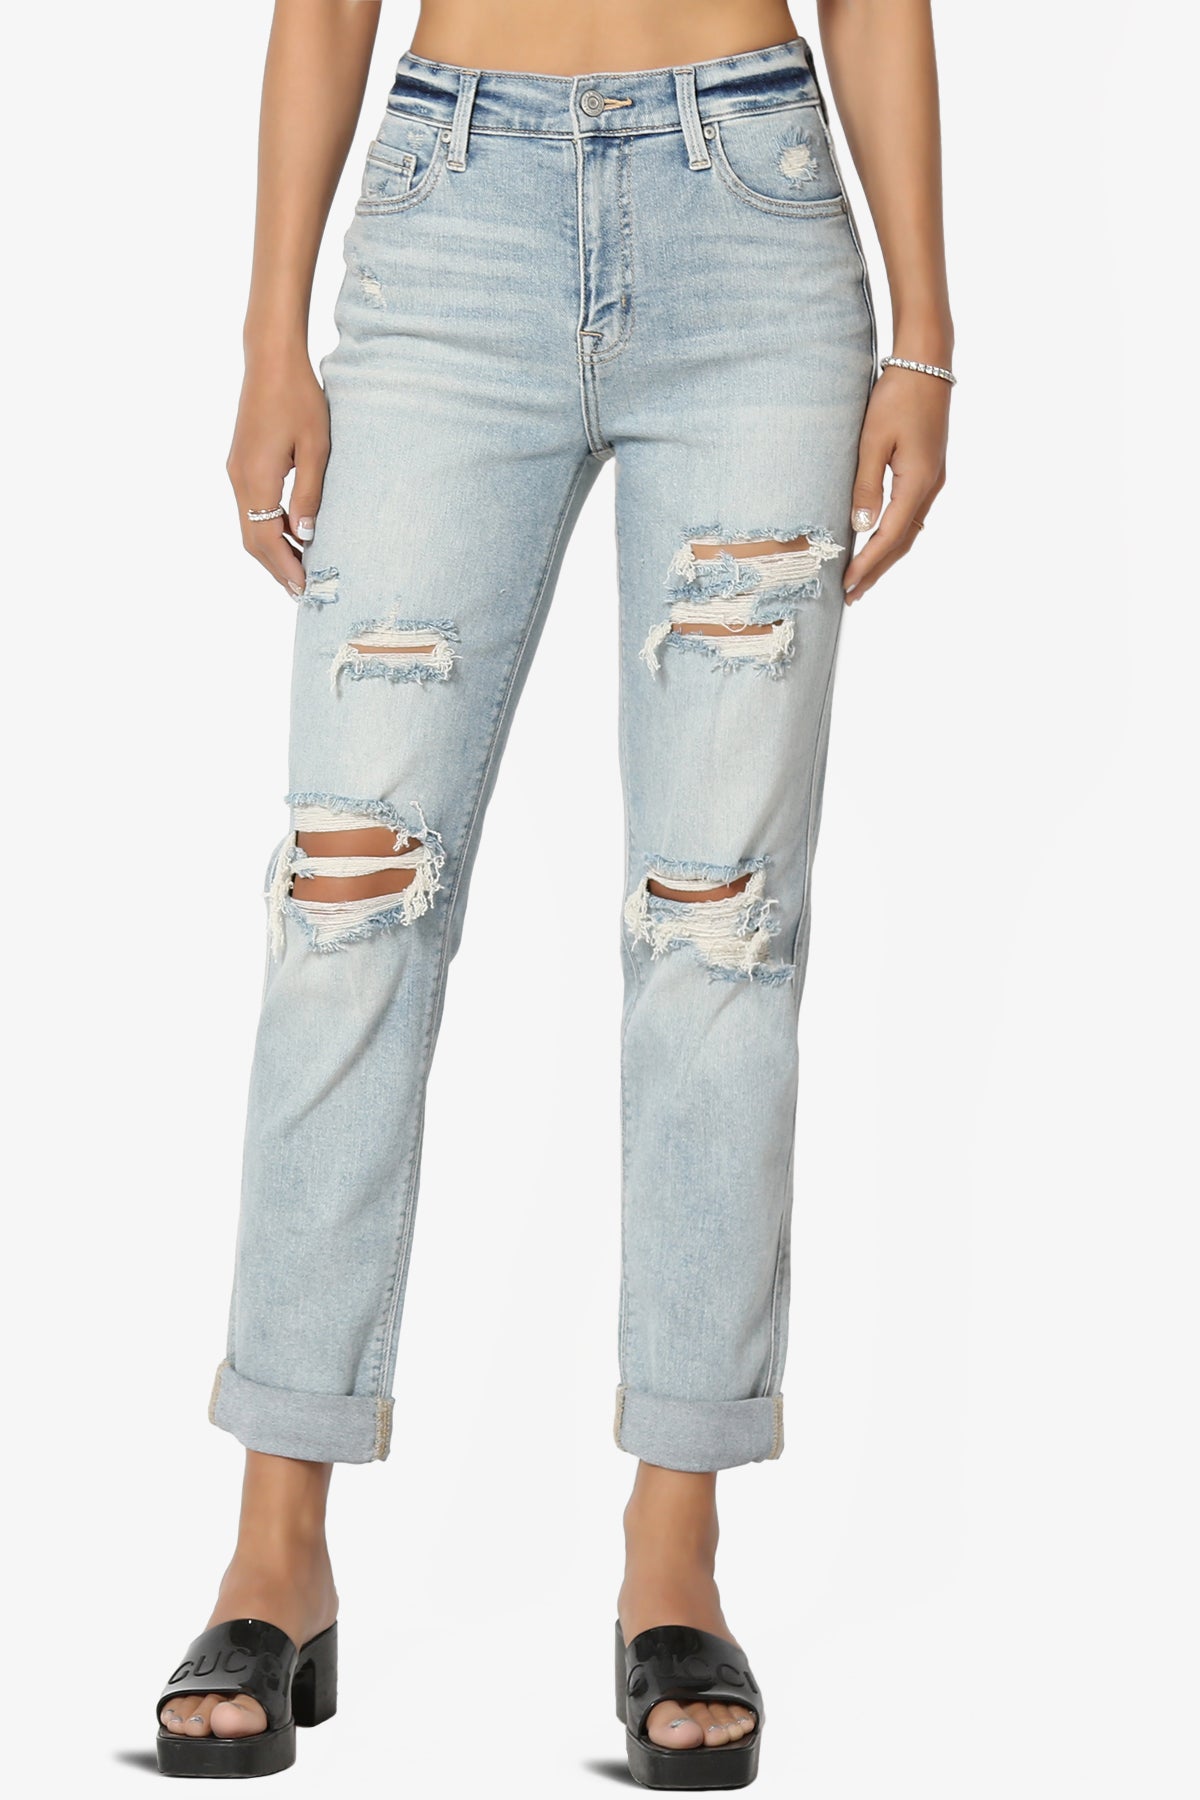 Rocky High Rise Distressed Boyfriend Jeans in ICMP LIGHT_1